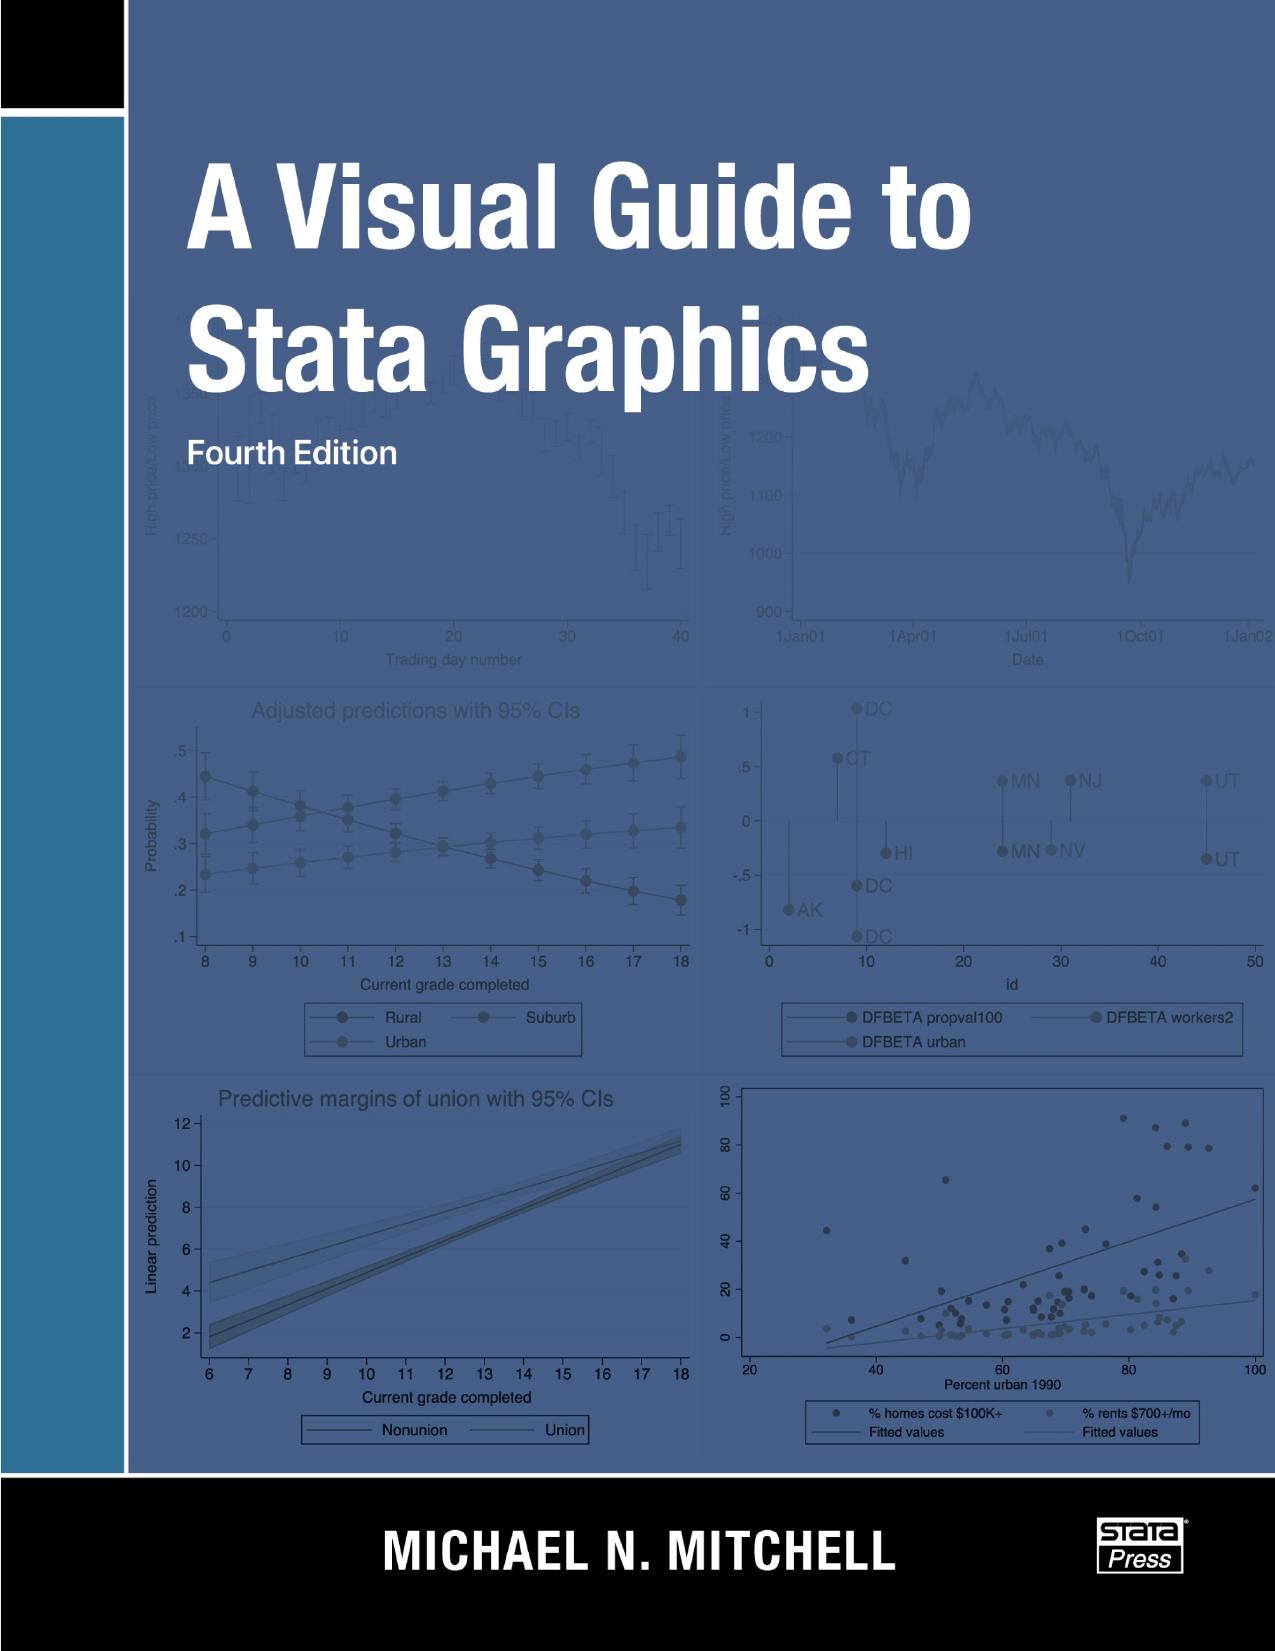 Visual Guide to Stata Graphics, Fourth Edition by Michael N. Mitchell